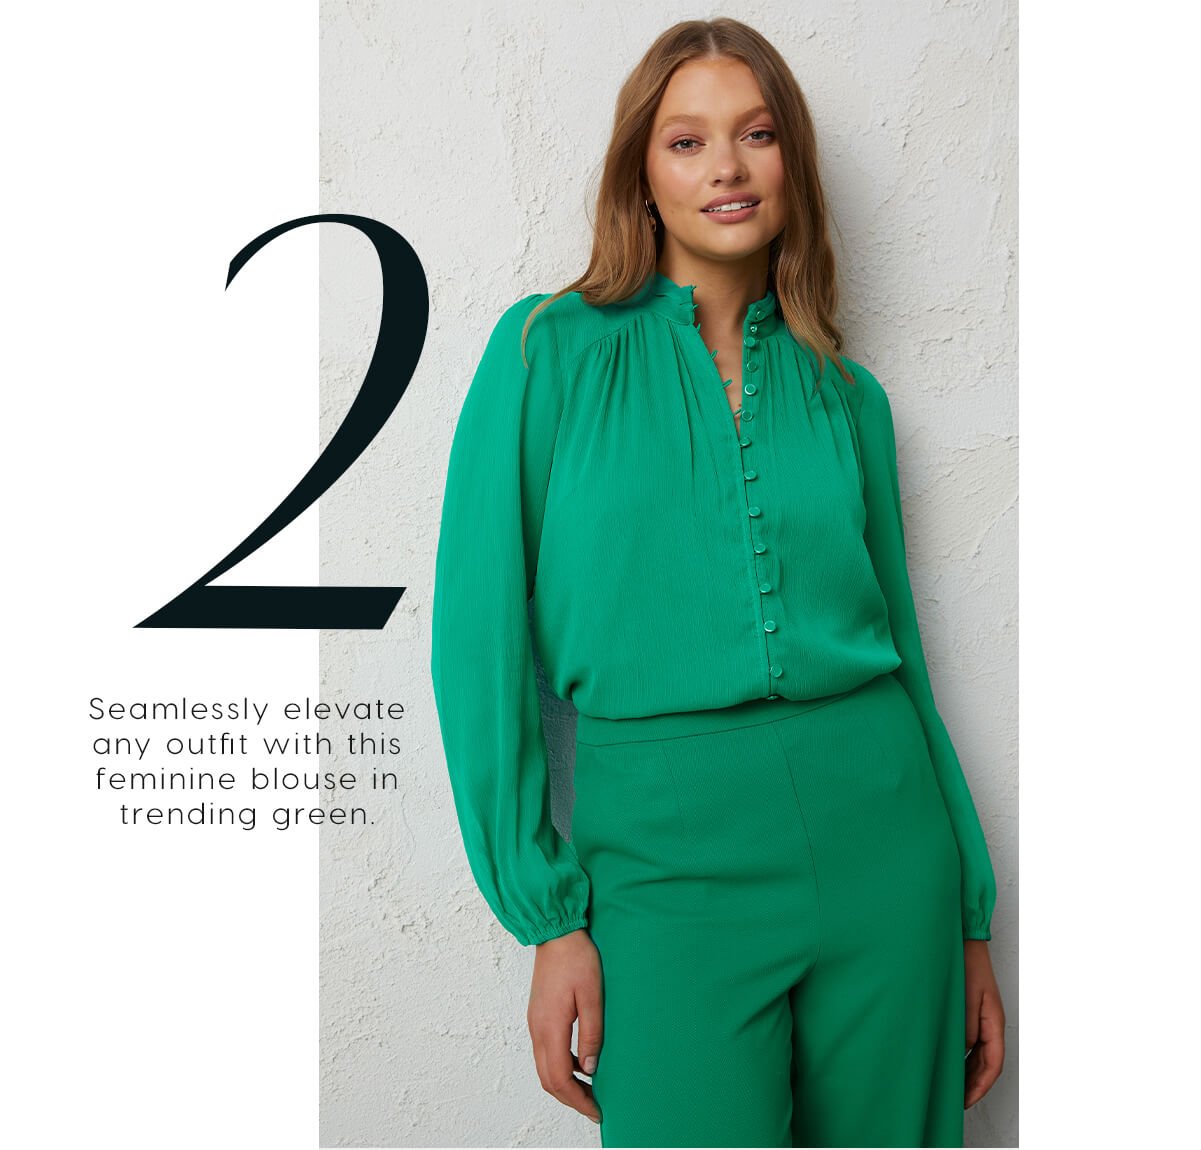 2. Seamlessly elevate any outfit with this feminine blouse in trending green.